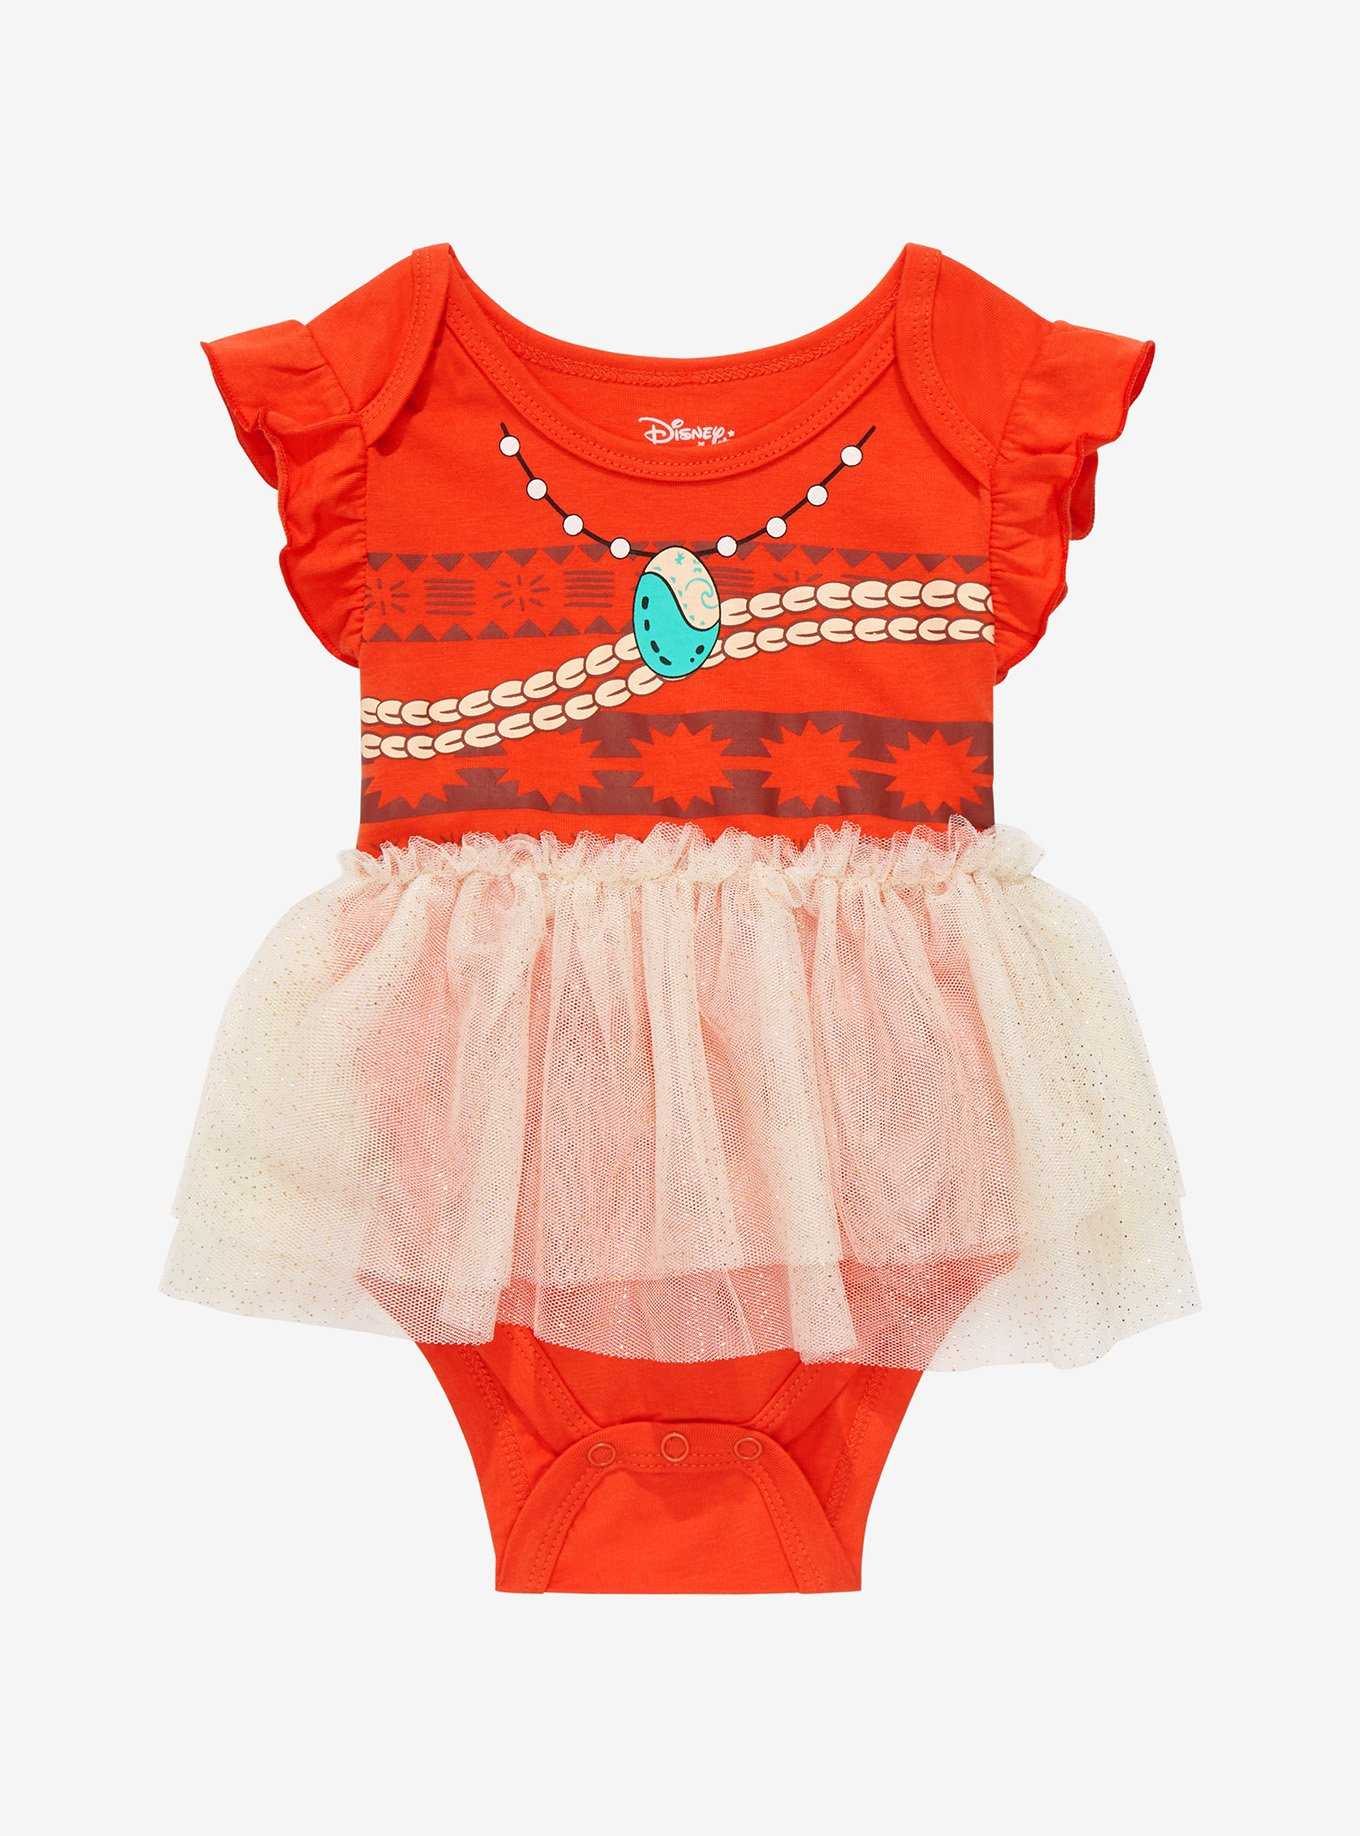 Disney Moana Moana's Outfit Infant Tutu One-Piece - BoxLunch Exclusive, , hi-res